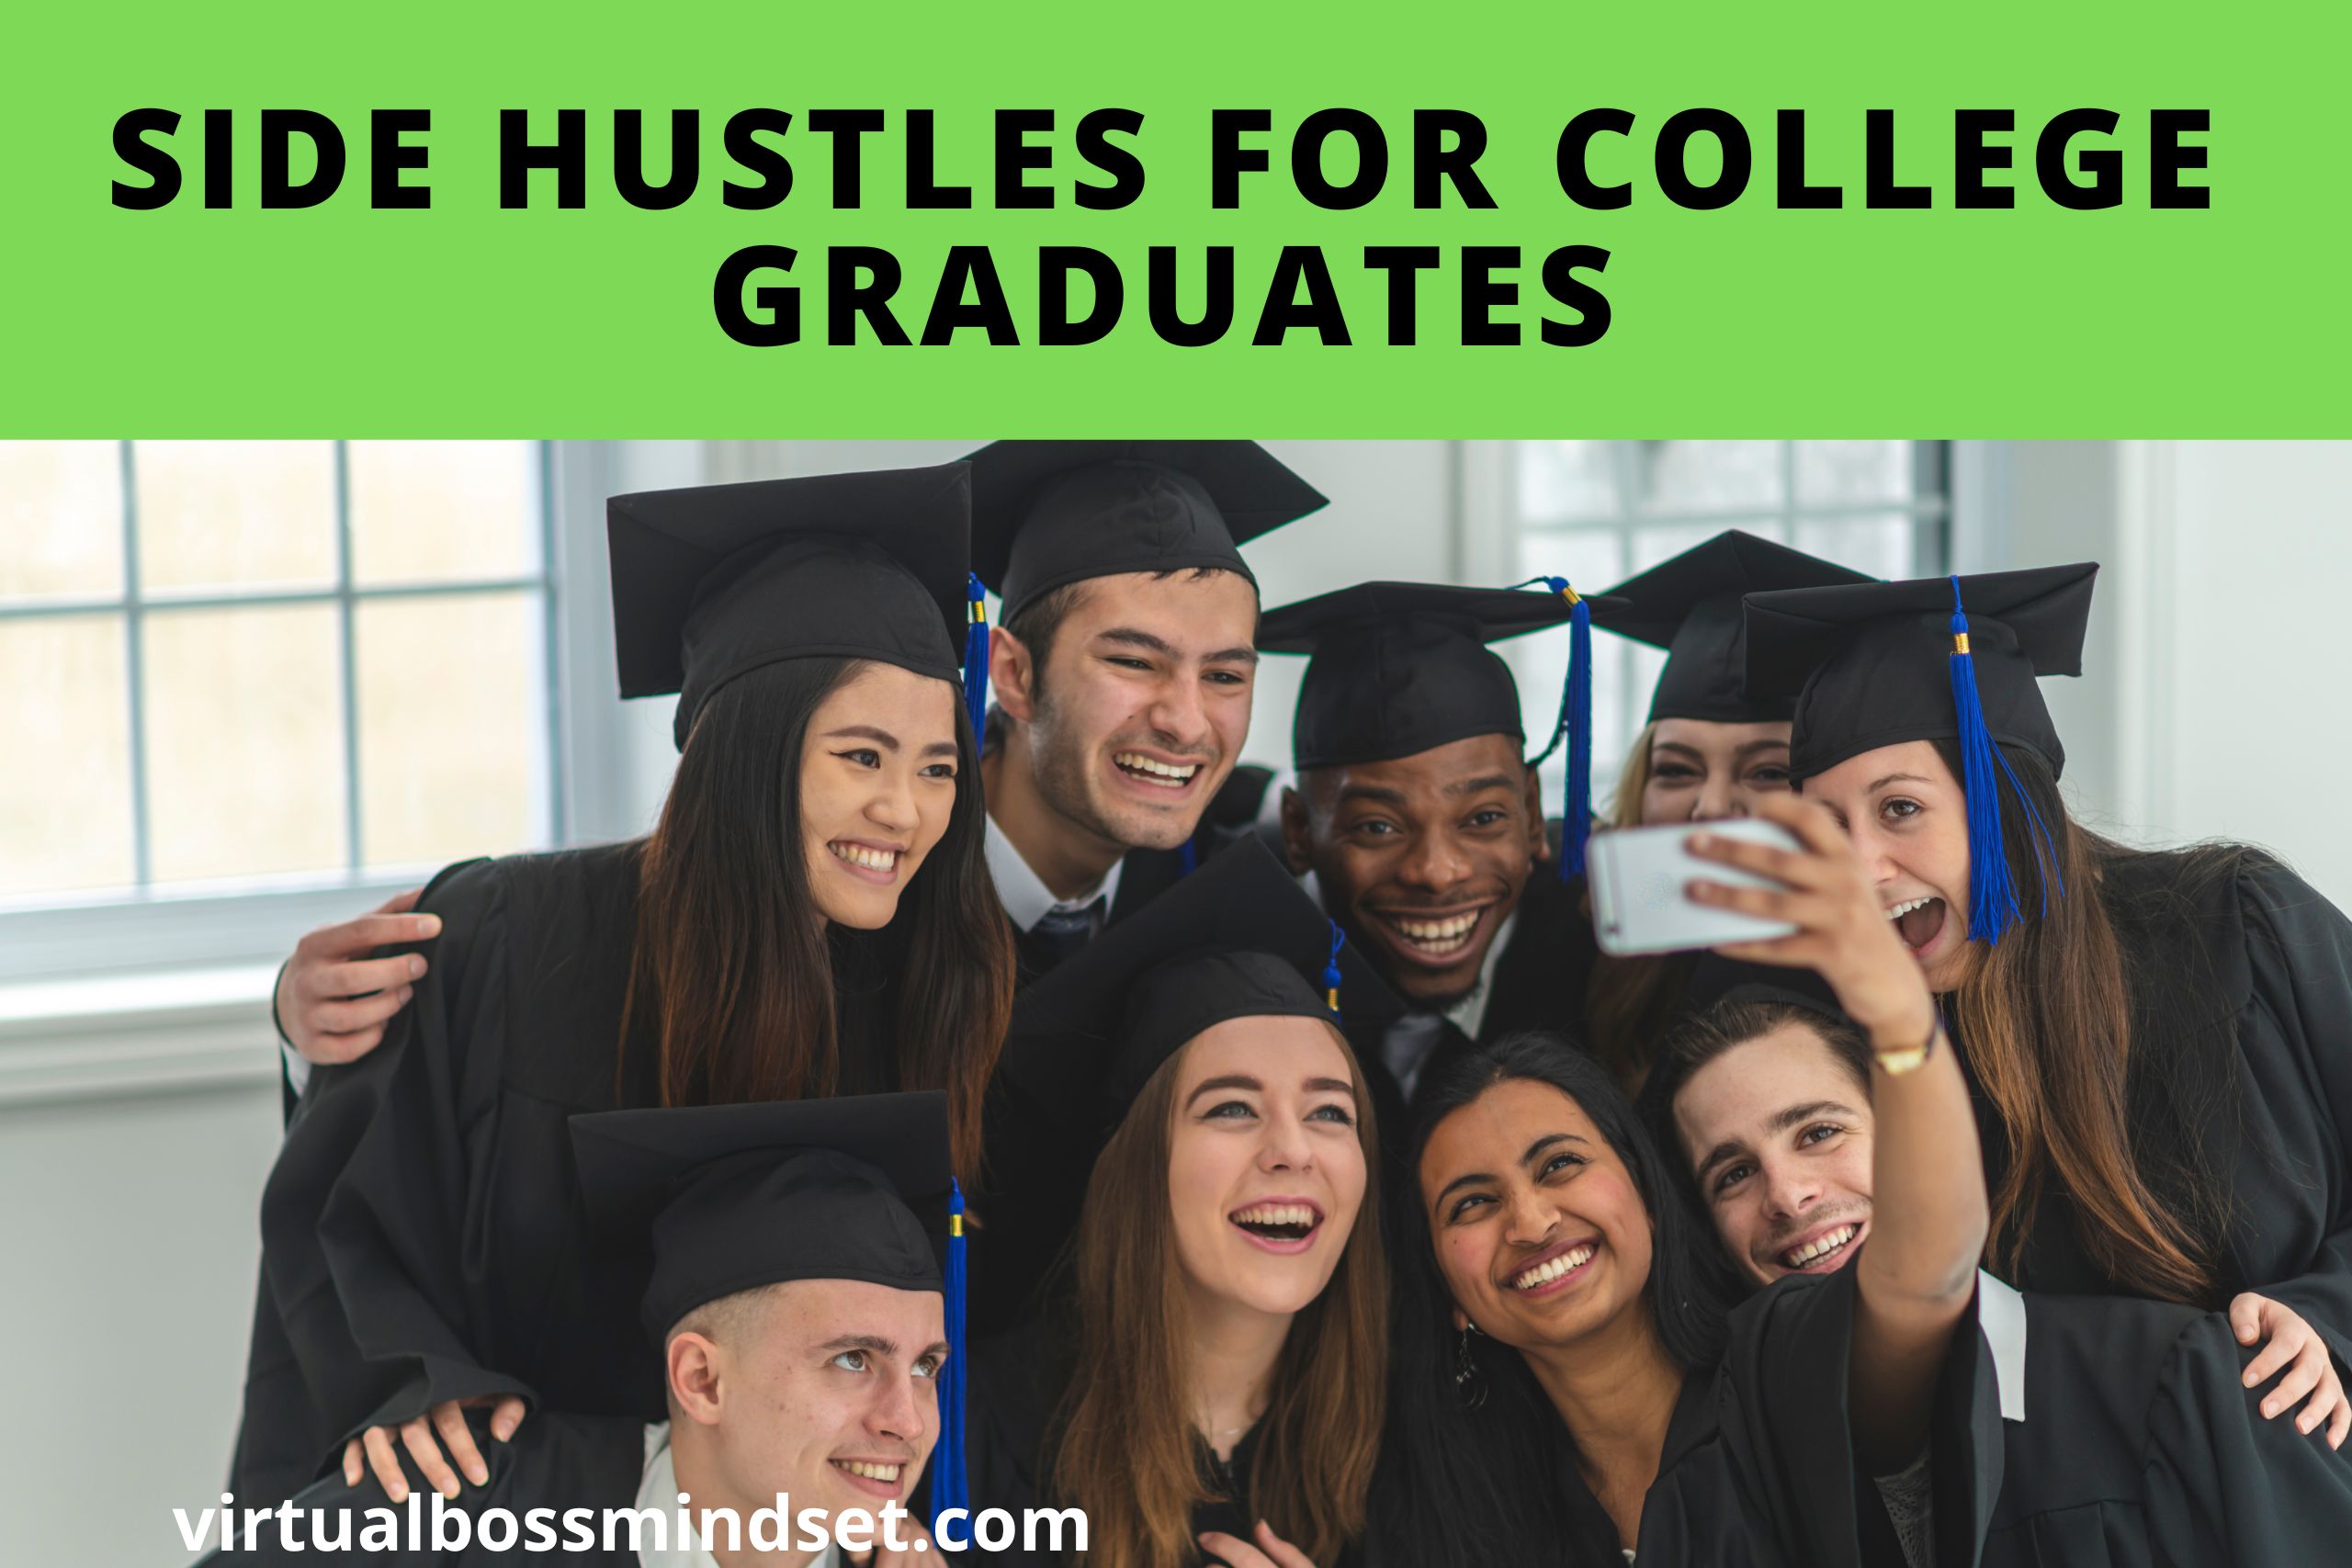 12 Side Hustles for College Graduates to Make Extra Money